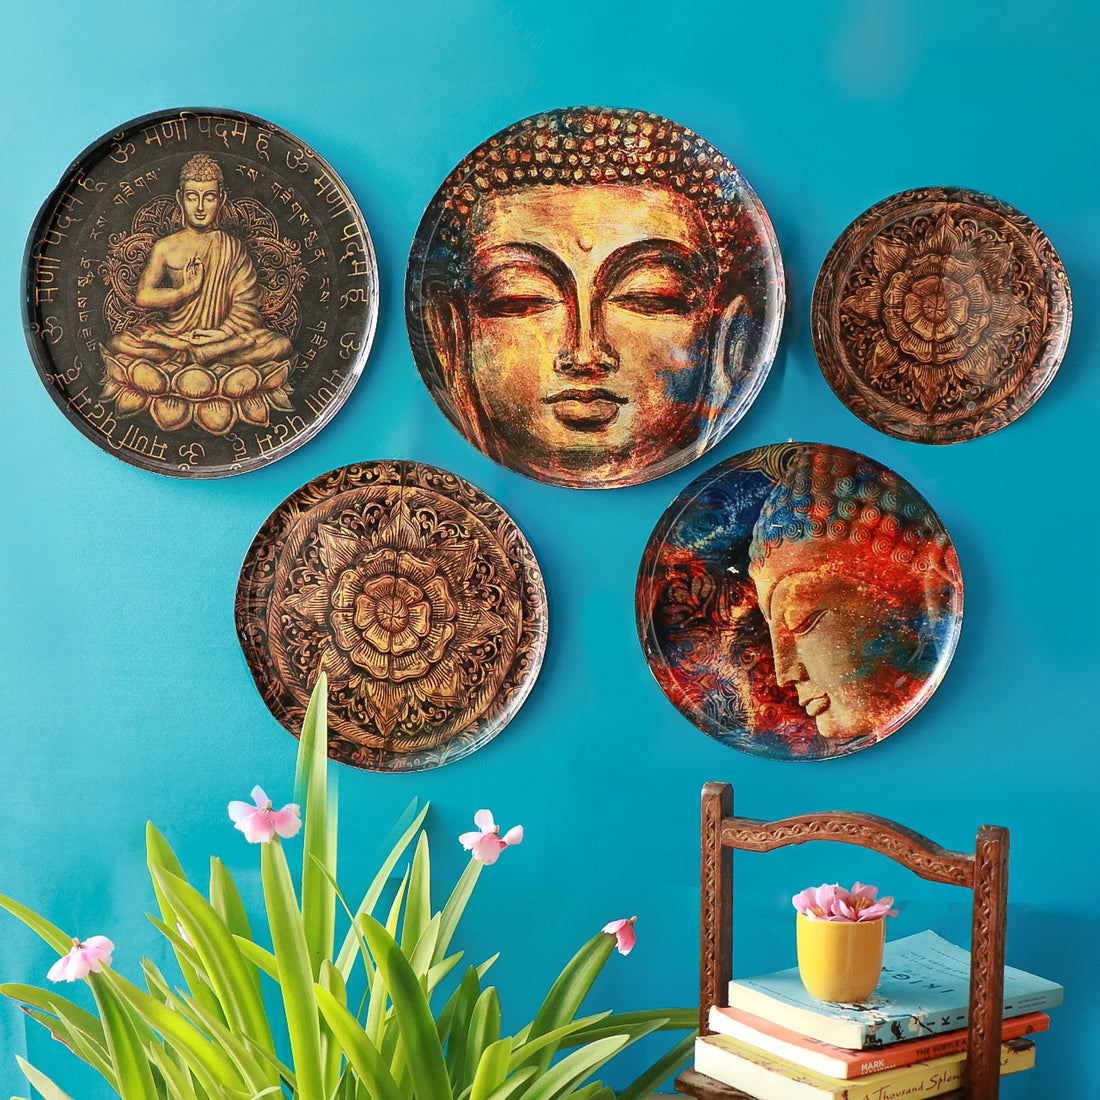 Wall Plates are the new International Decor Trend